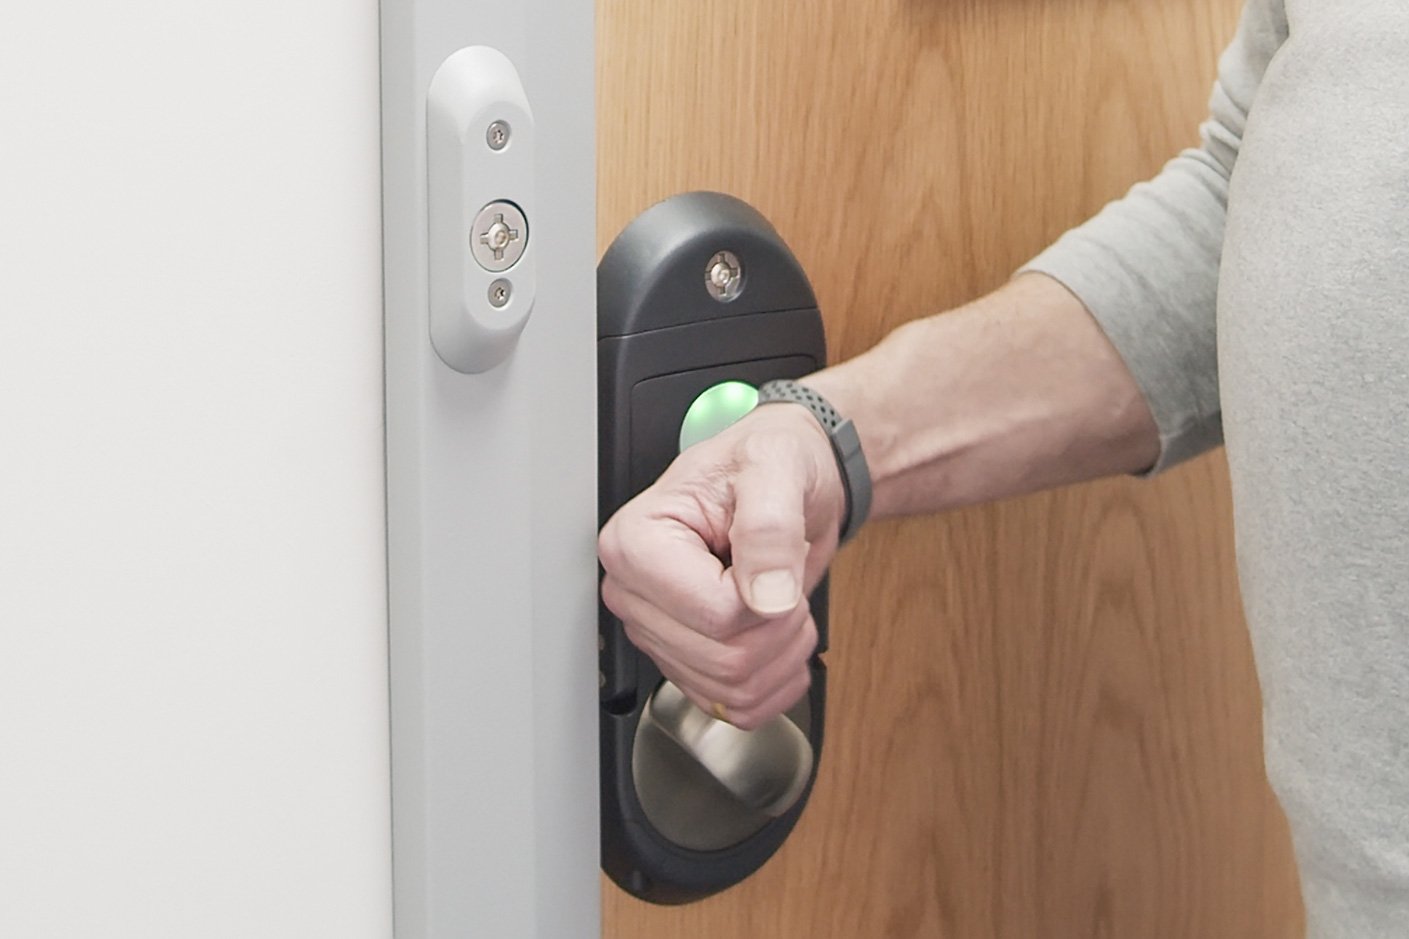 Patient unlocking their door with wristband access